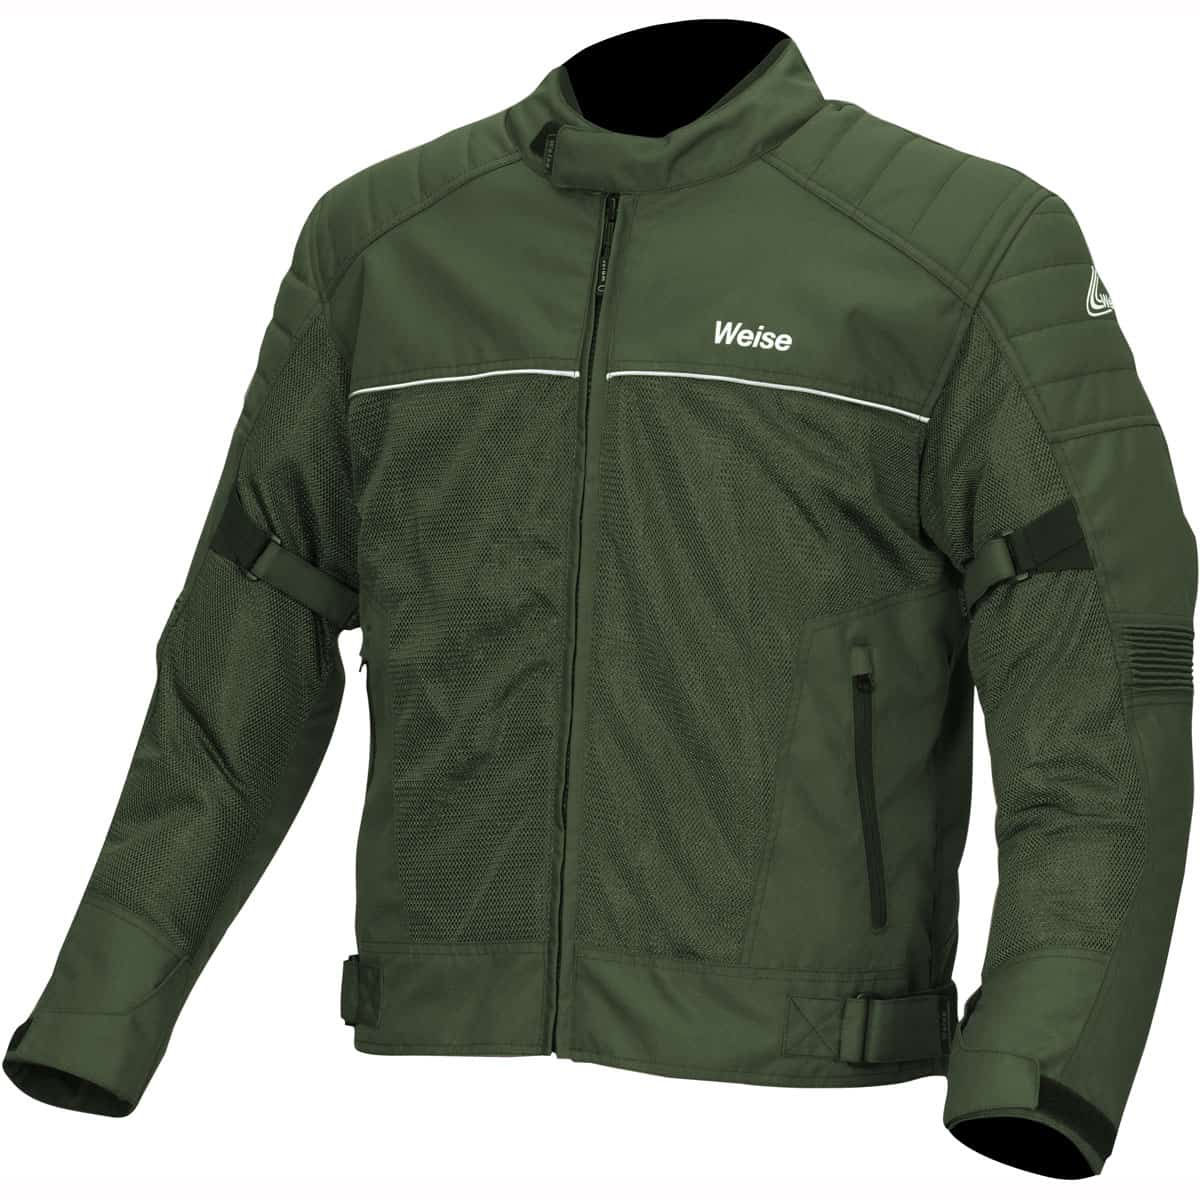 Weise Scout mesh motorcycle jacket green left